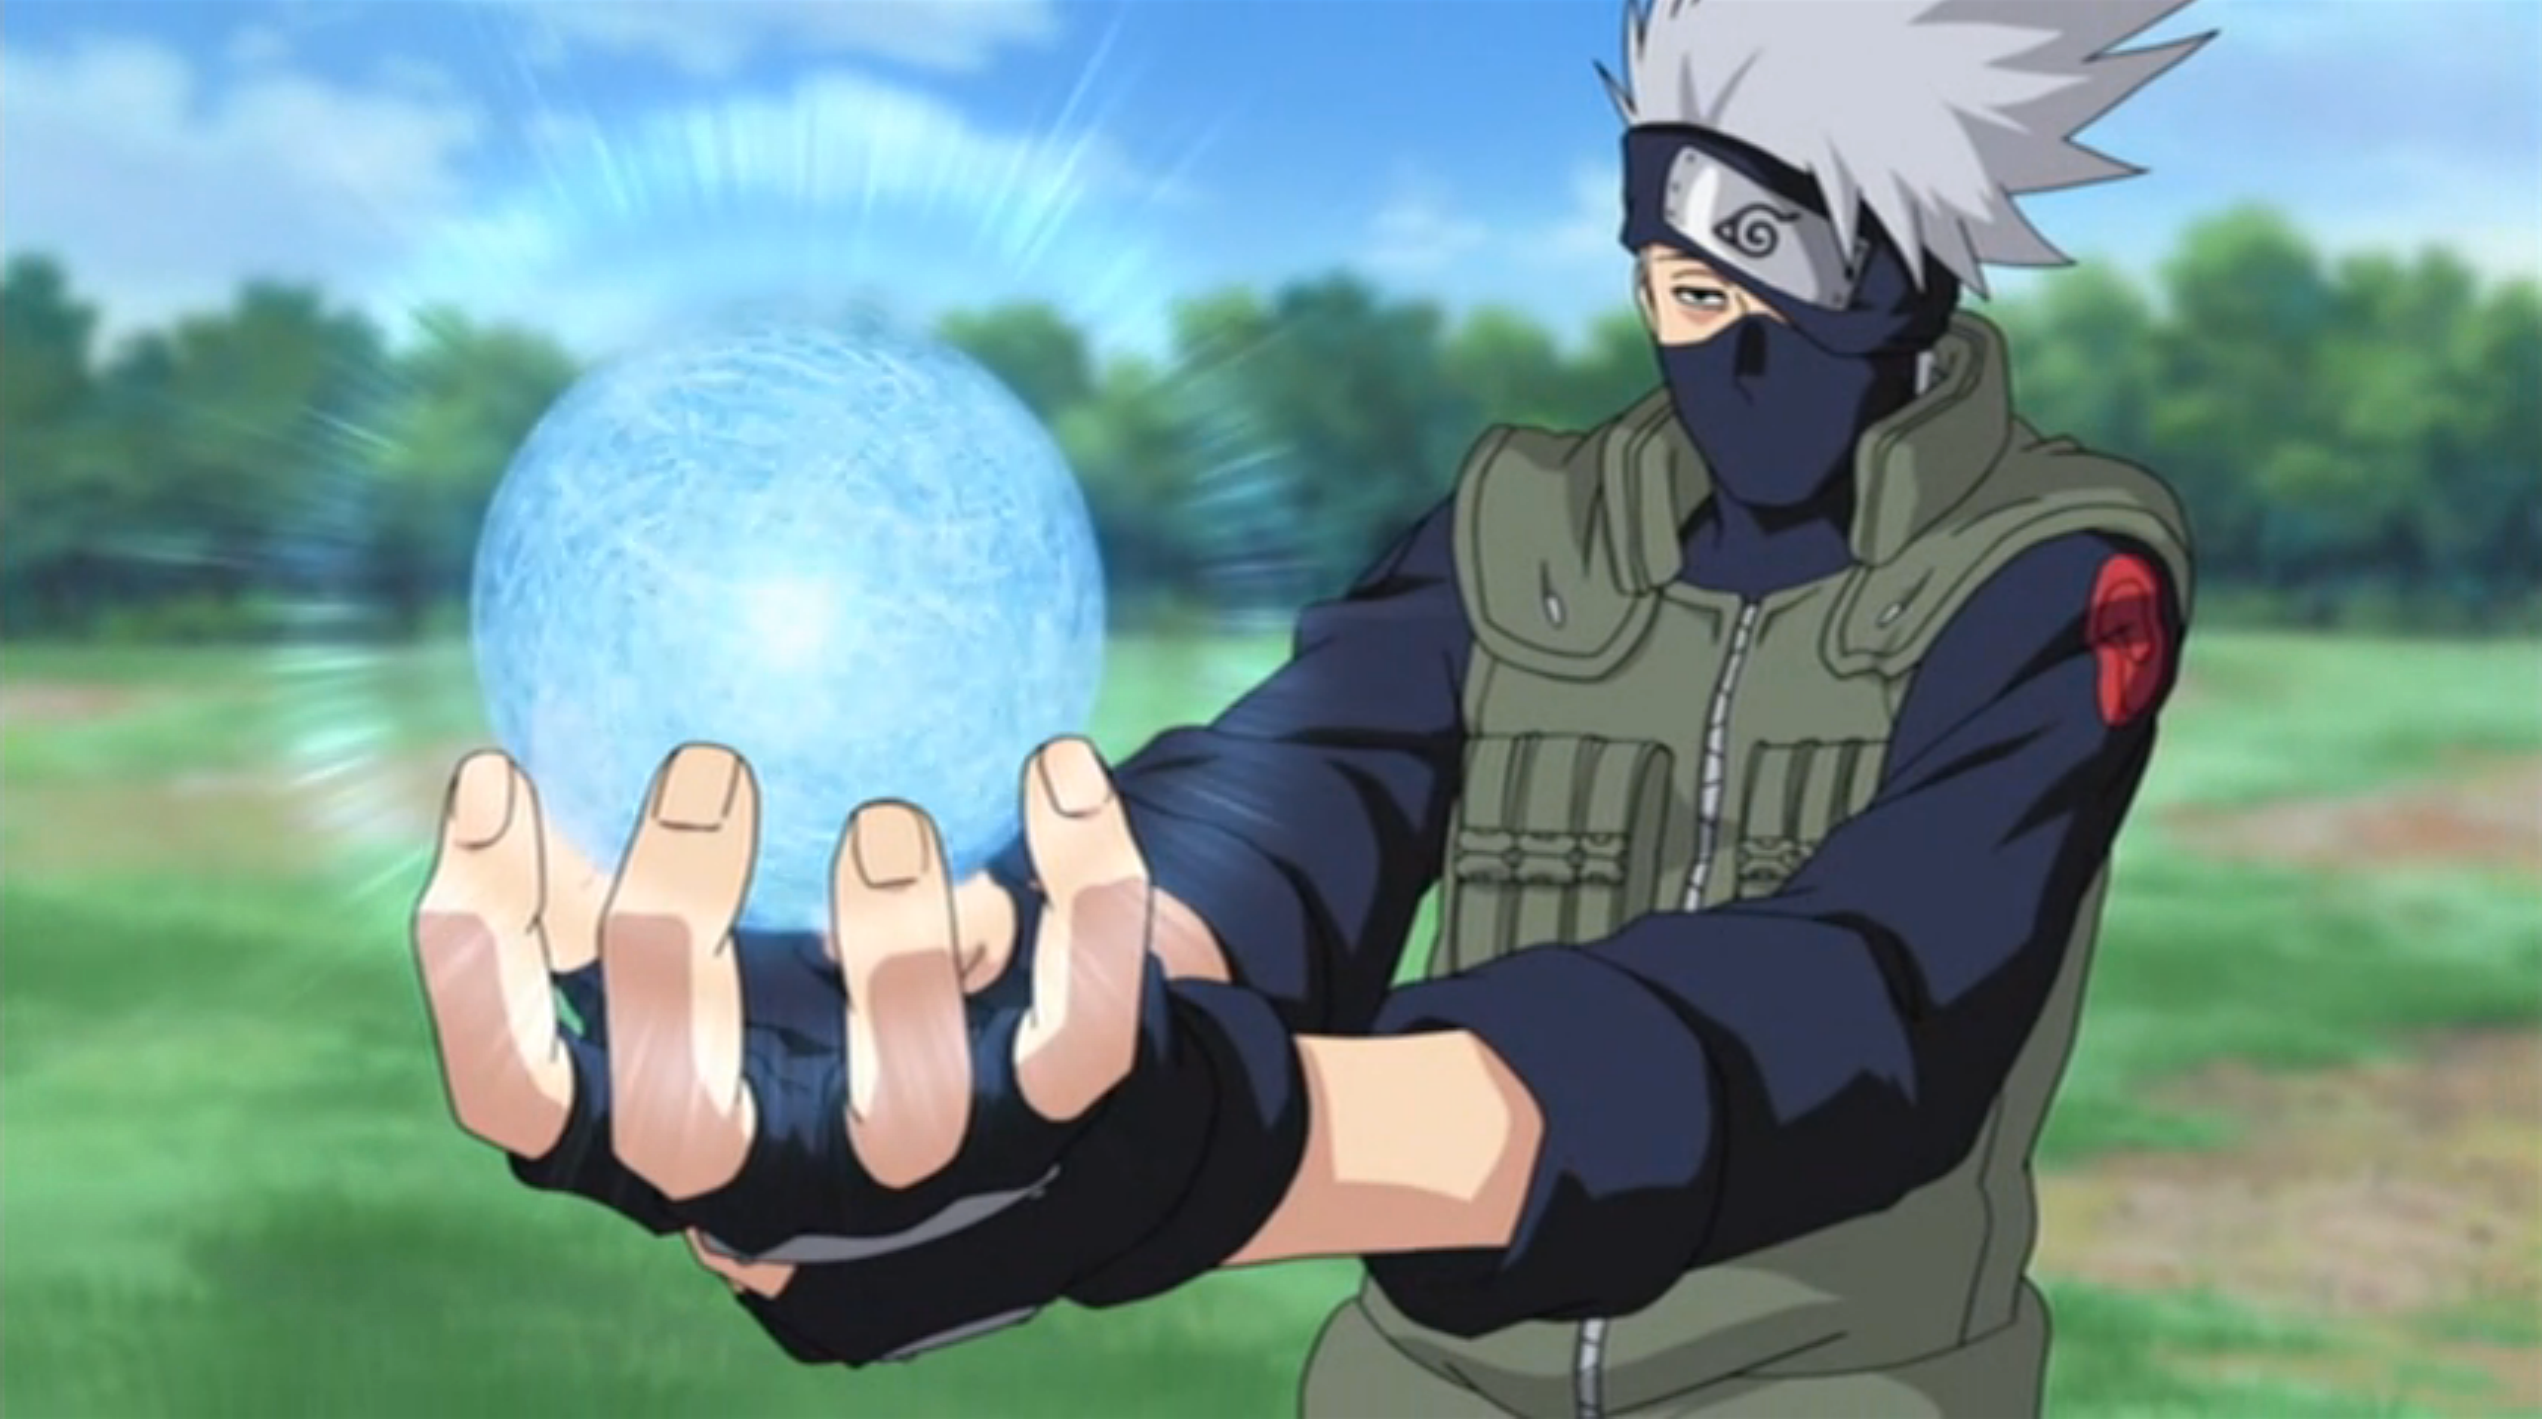 If the Rasengan is superior to the Chidori, why didn't Naruto beat